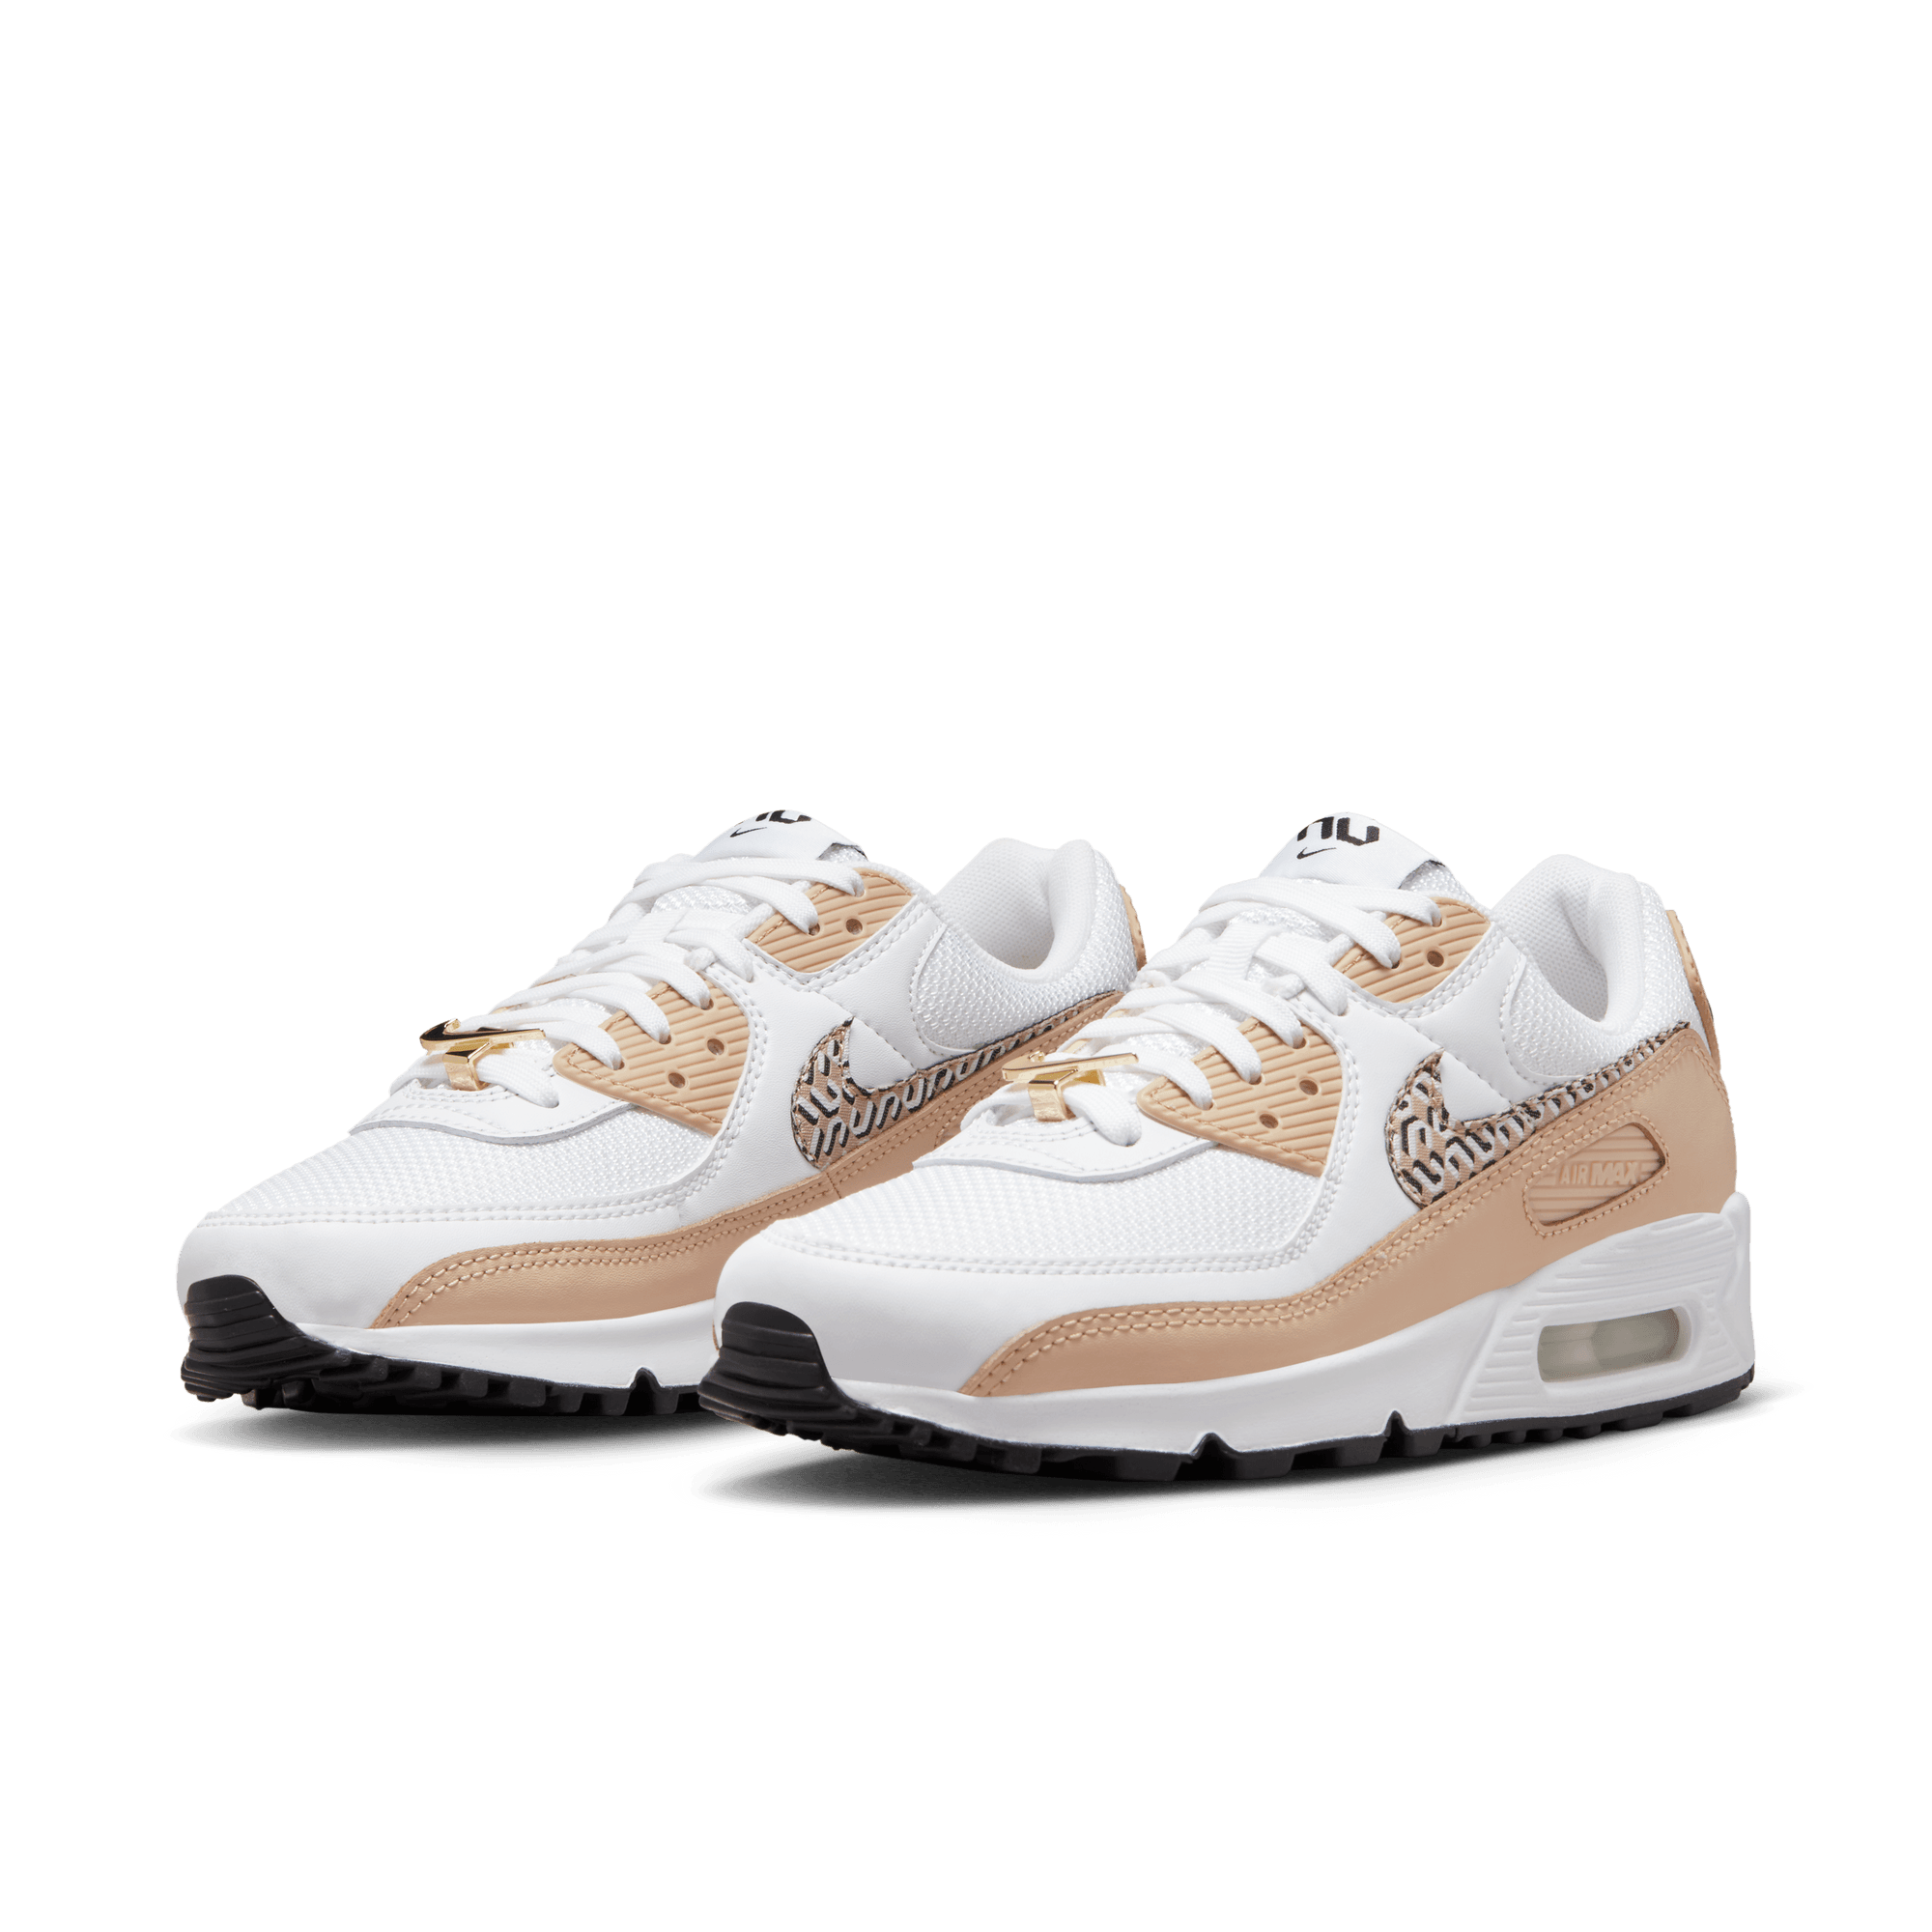 Women's Nike Air Max 90 “United In Victory” – The Closet Inc.